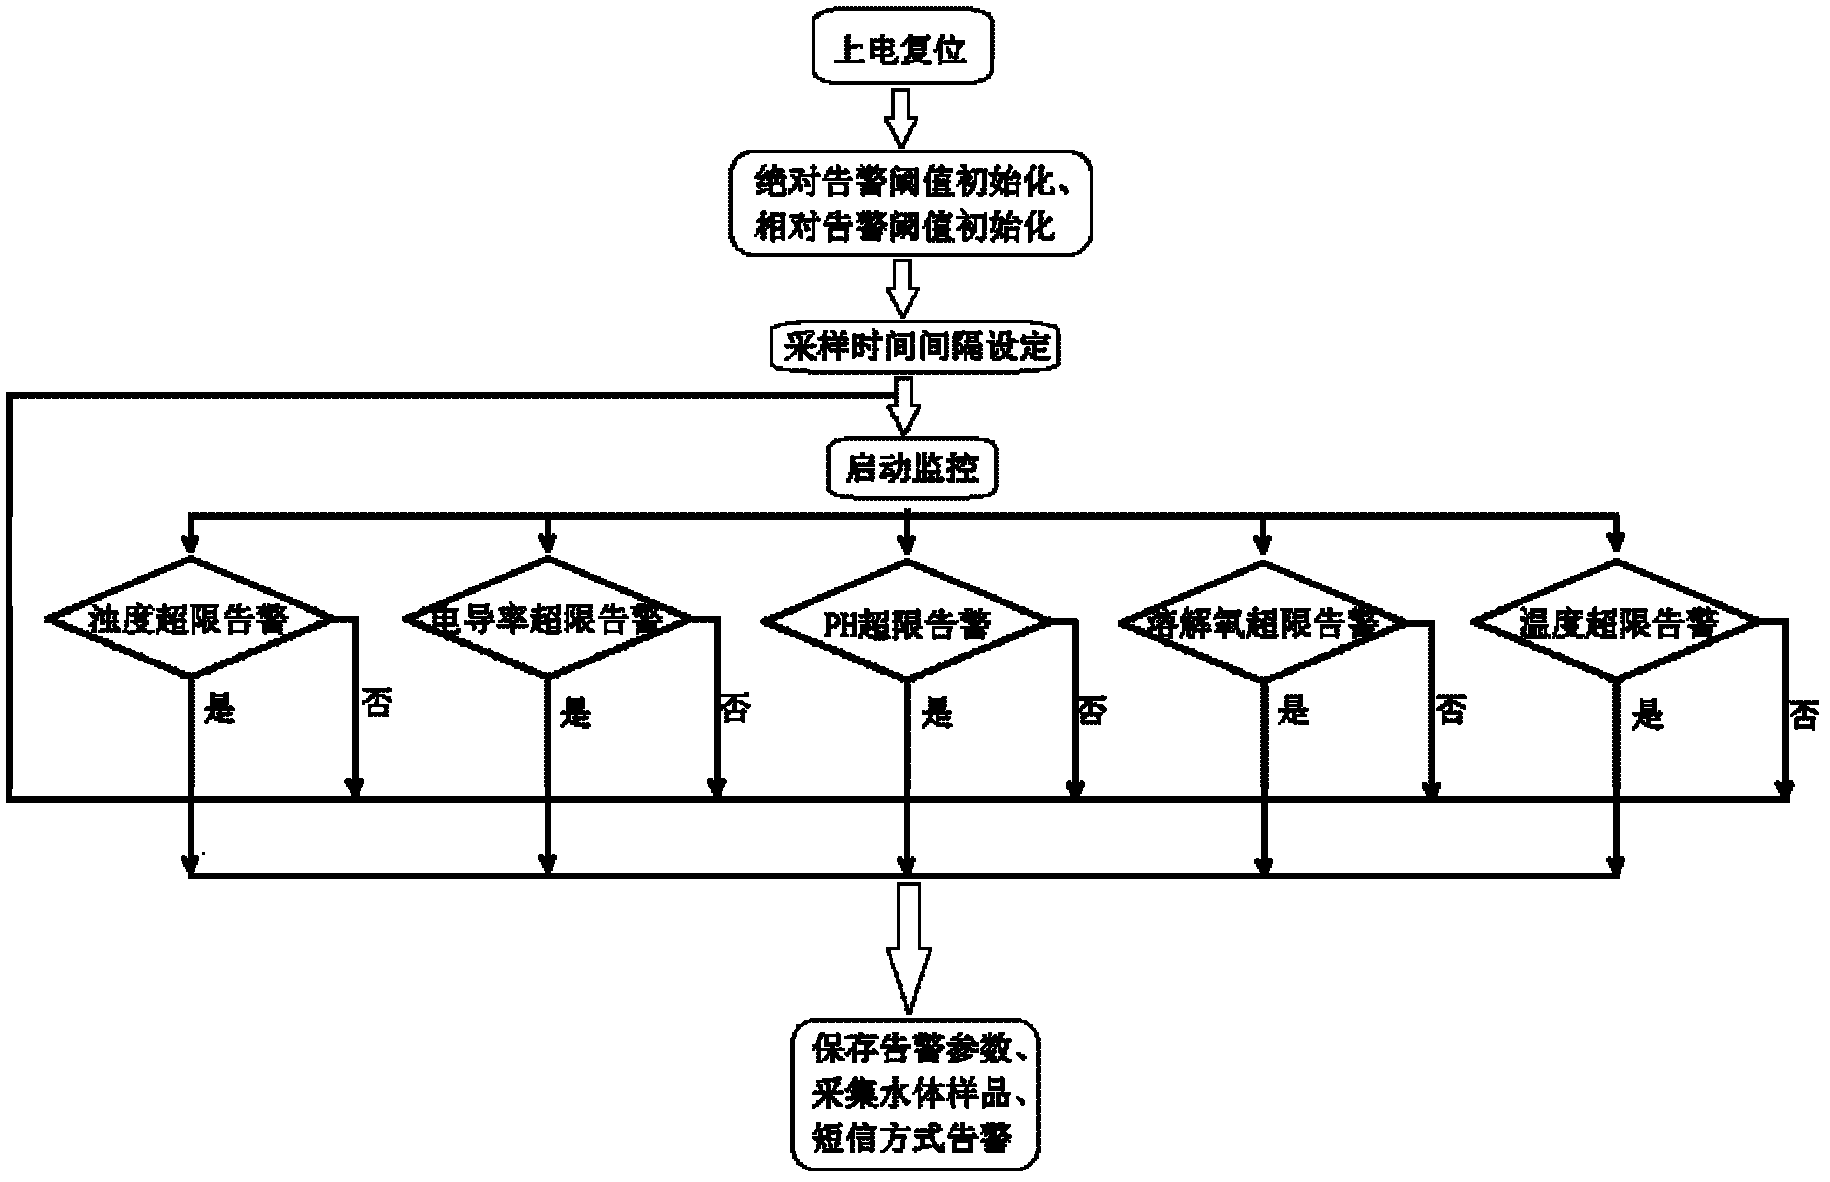 Water pollution monitoring automatic sampling decision making system and sampling device